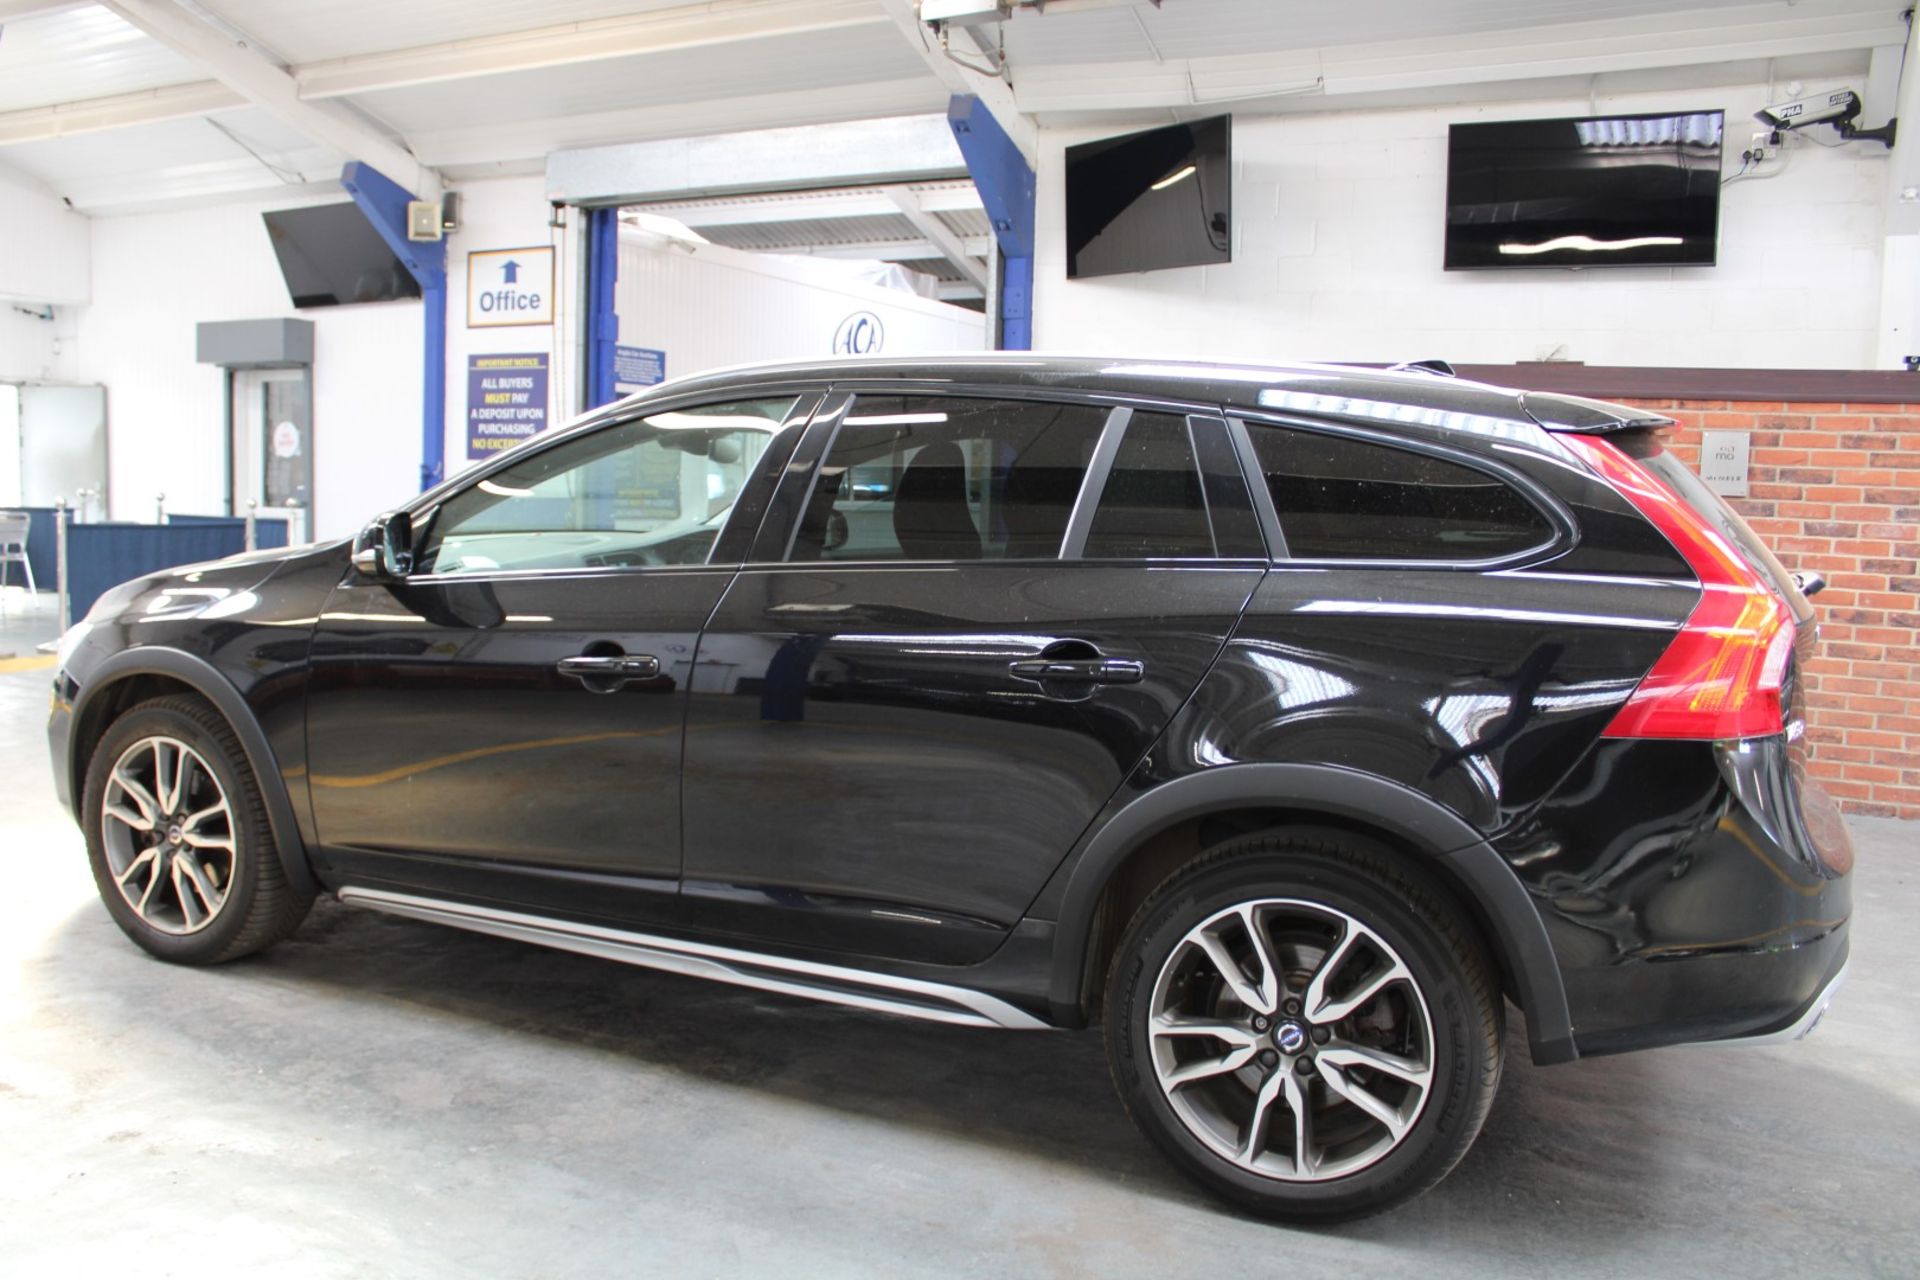 66 16 Volvo V60 Cross Country Lux - Image 33 of 34